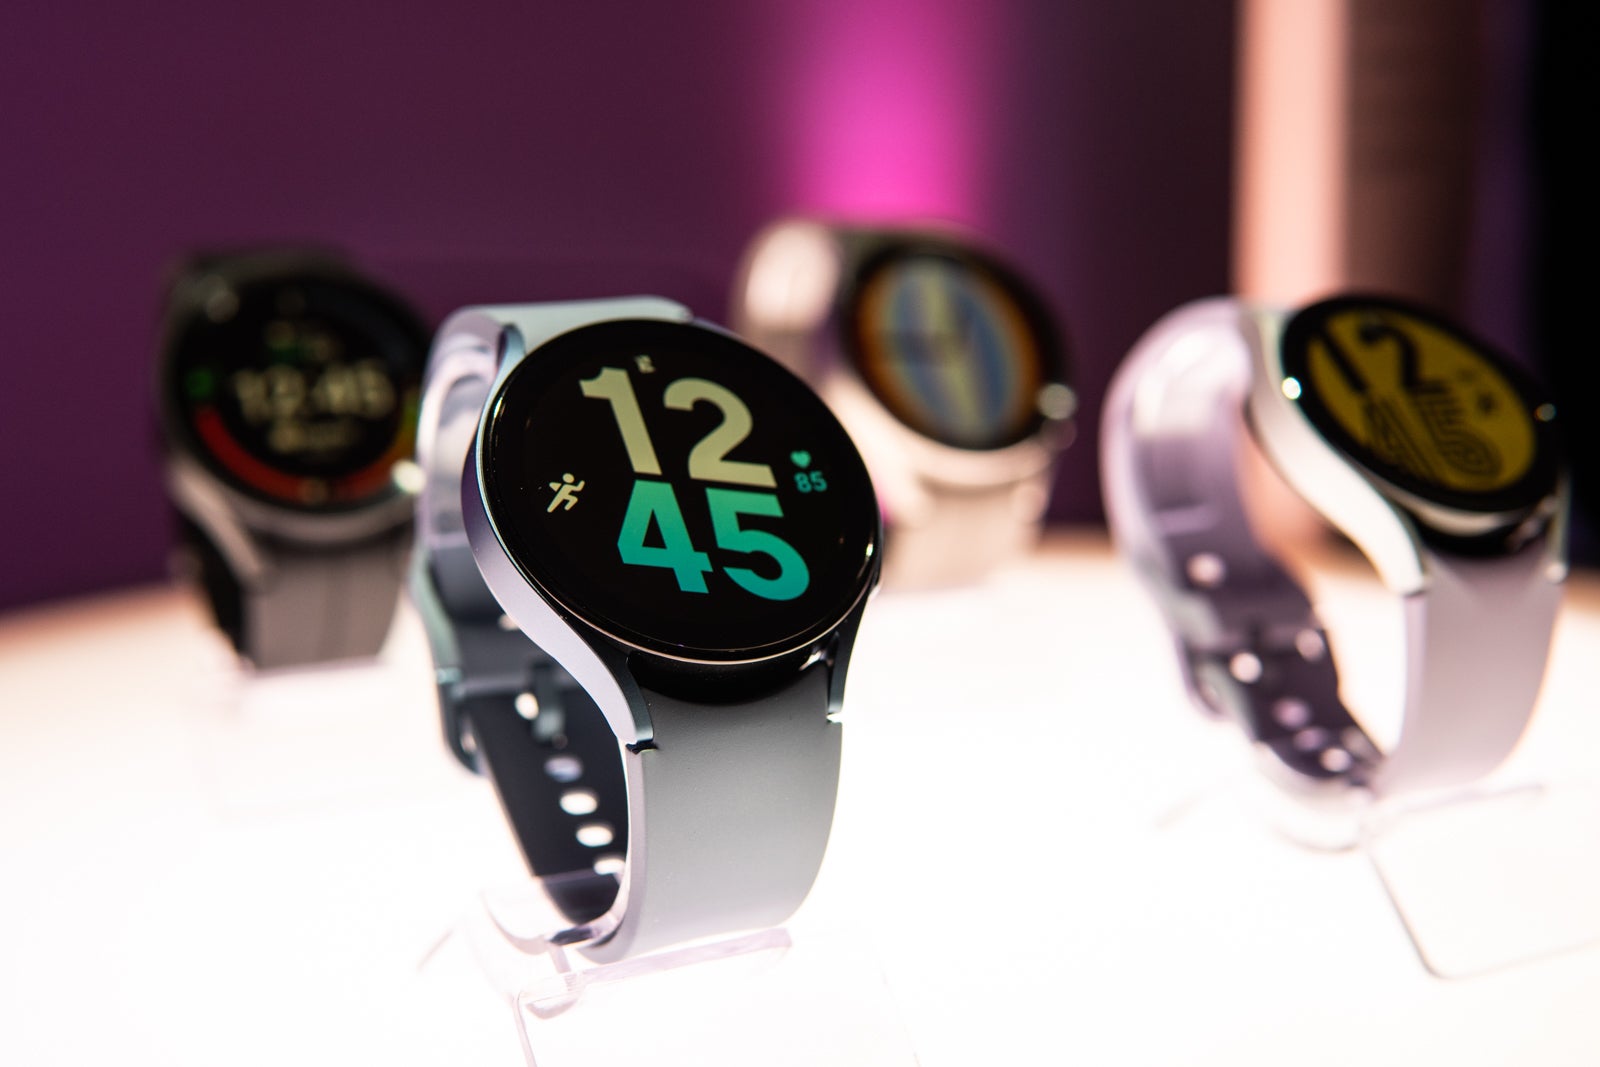 Galaxy Watch 5 family - Samsung Galaxy Watch 5 release date, price and features